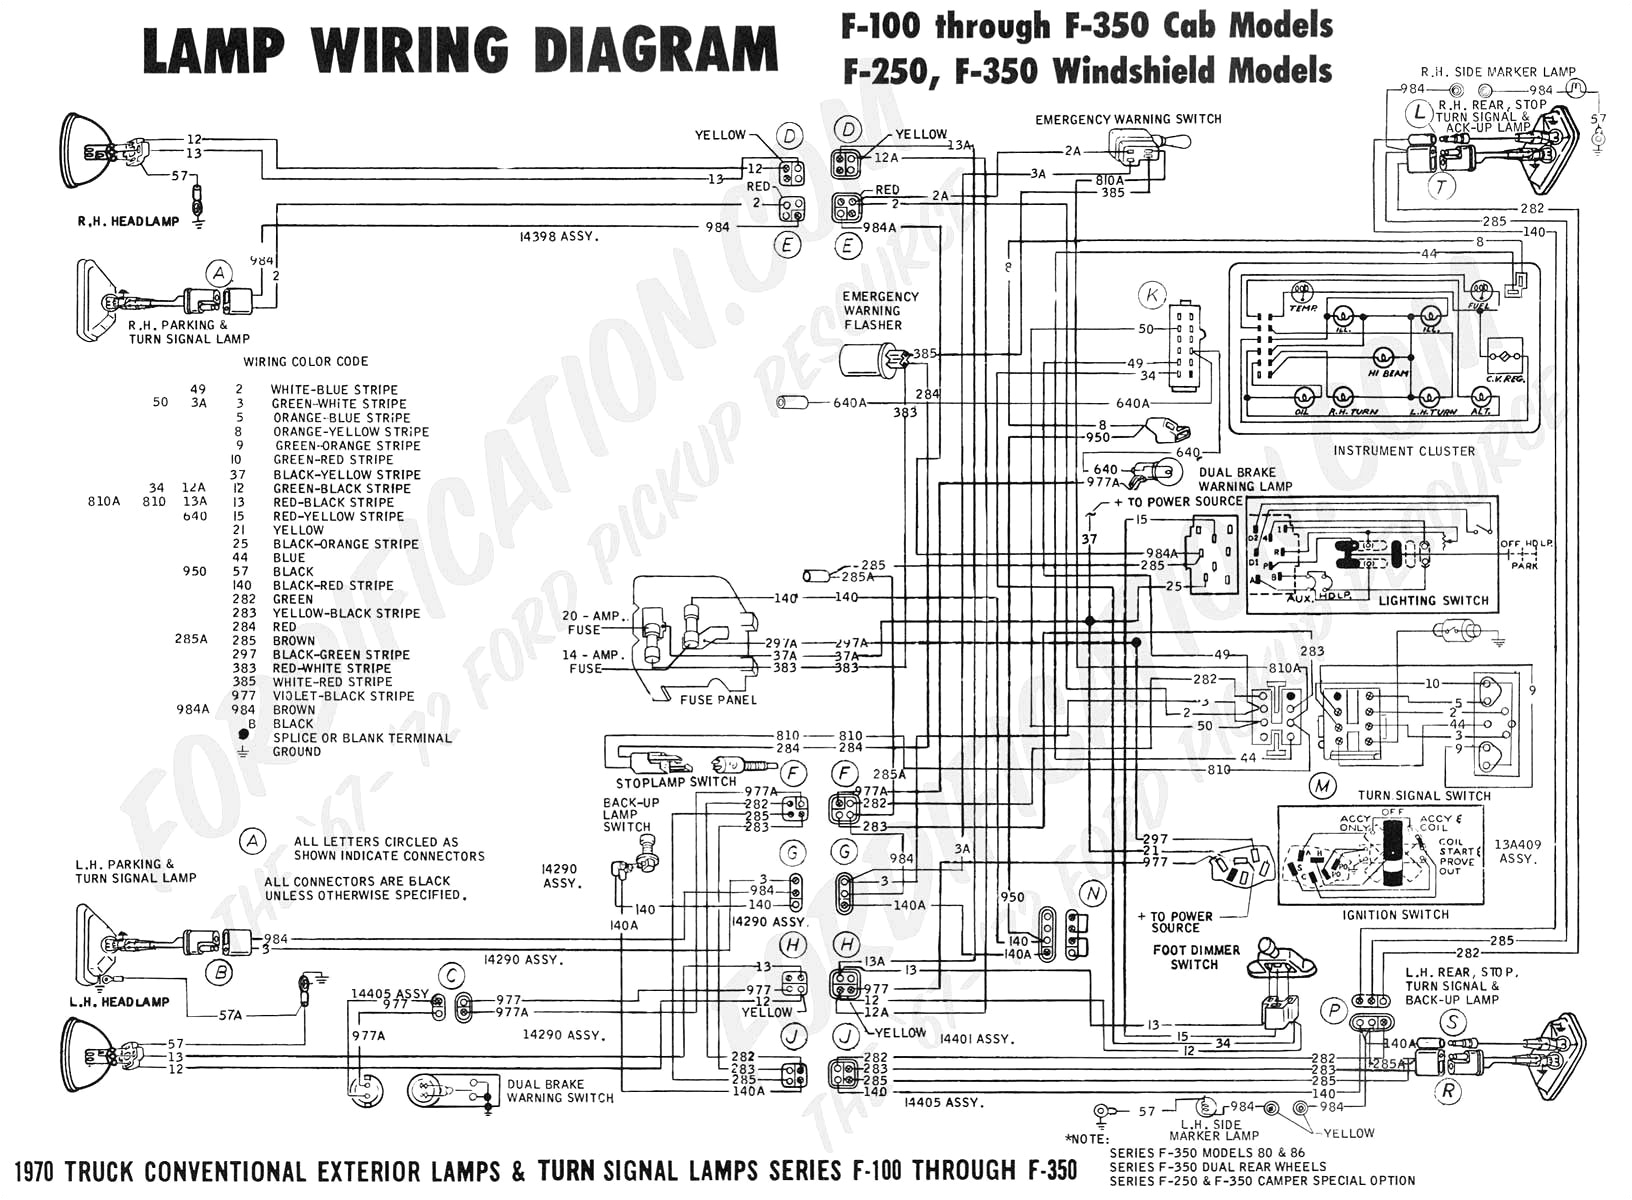 1983 ford f 350 truck alternator diagram wiring diagram schematic wiring diagram for a 1985 ford mustang free download image about all